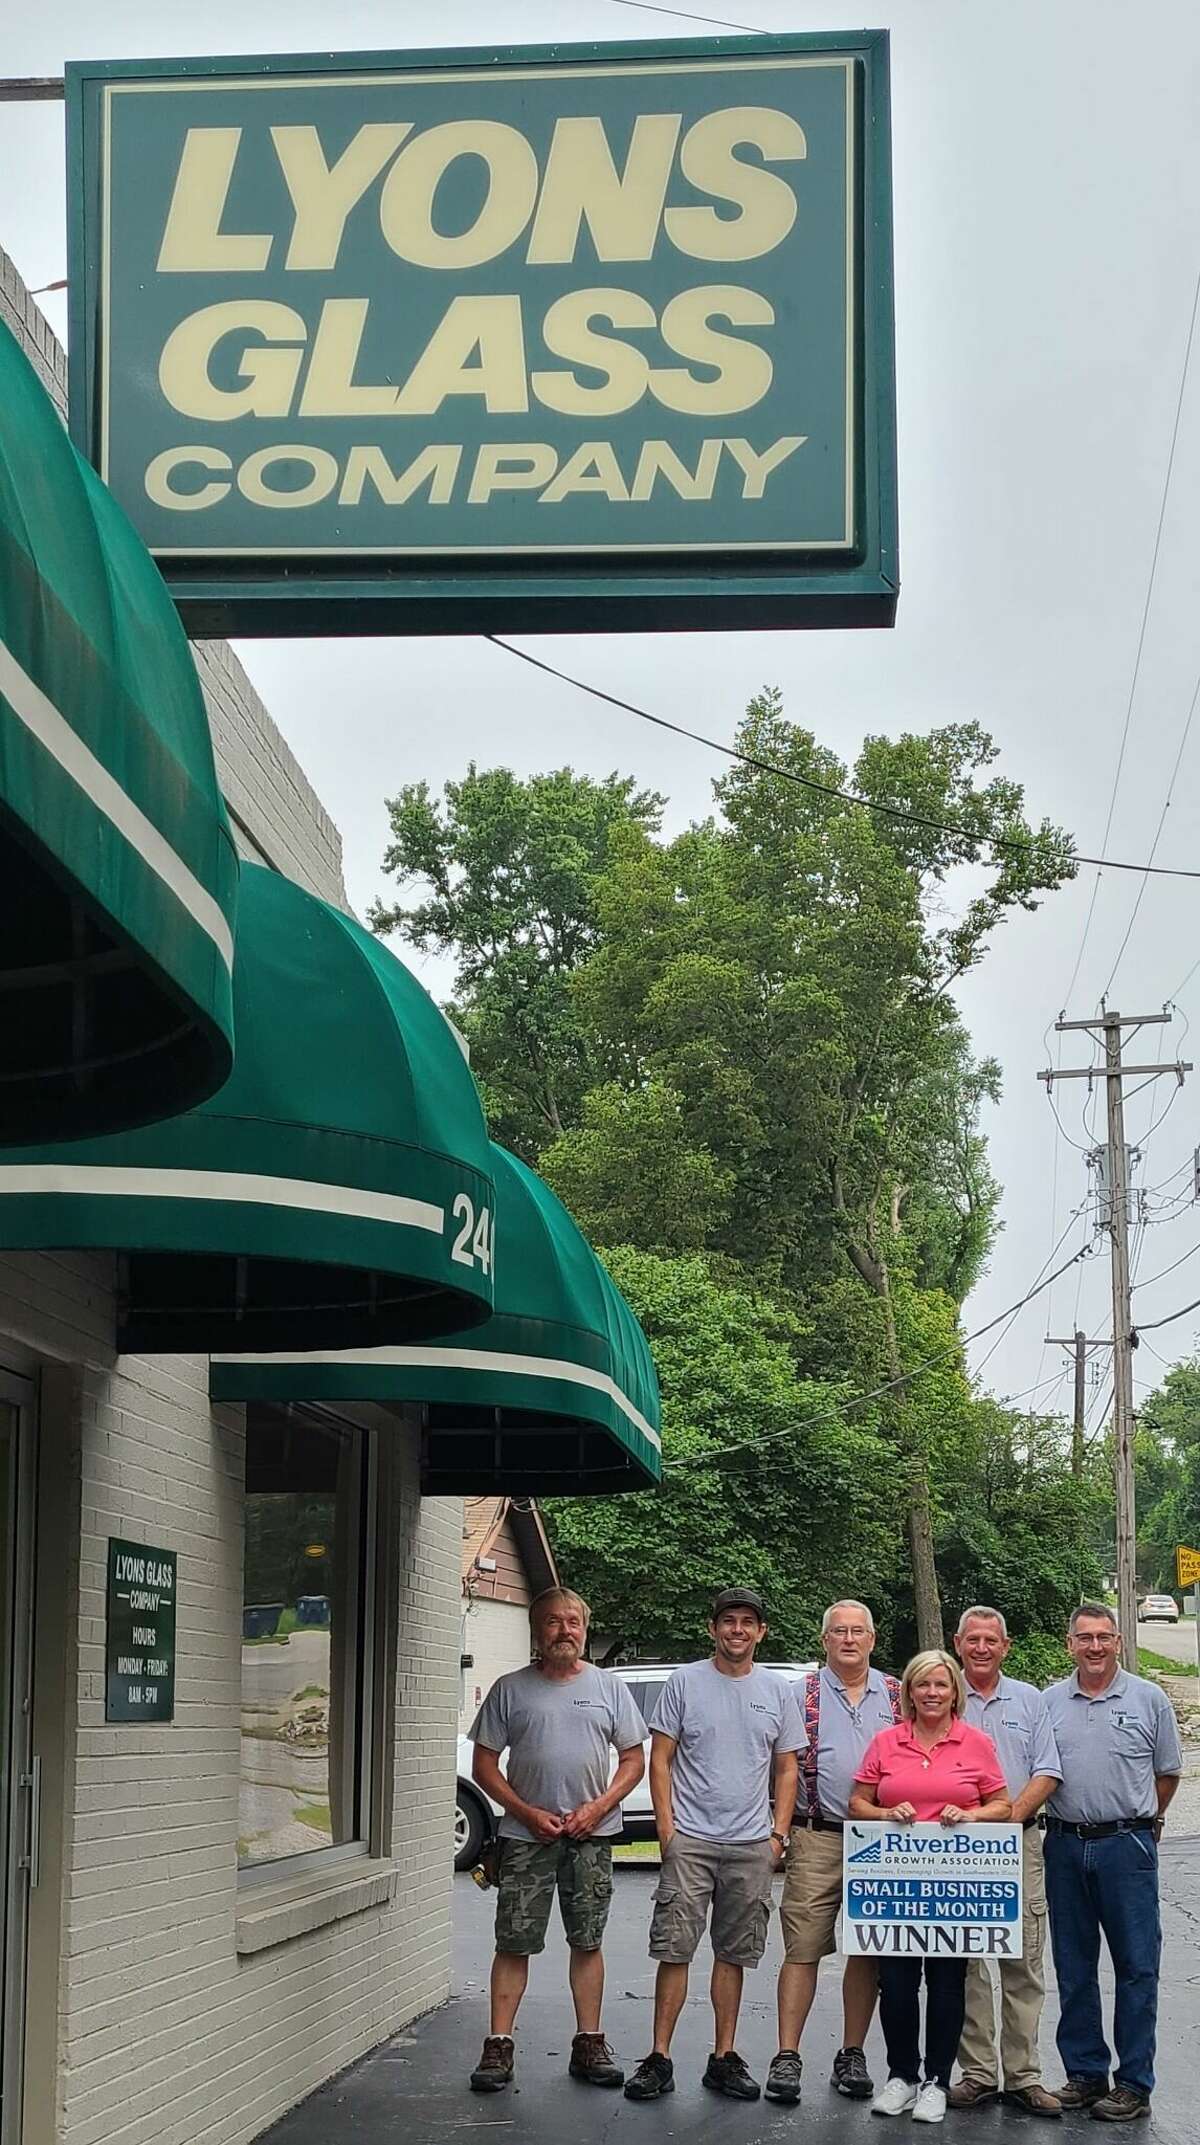 Lyons Glass Company has been named the Small Business of the Month for August by the RiverBend Growth Association. Team members are Perry Hill, Jeanne Hill, Steve Hill, Dick Lyons, Joe Young and Virgil Langford.